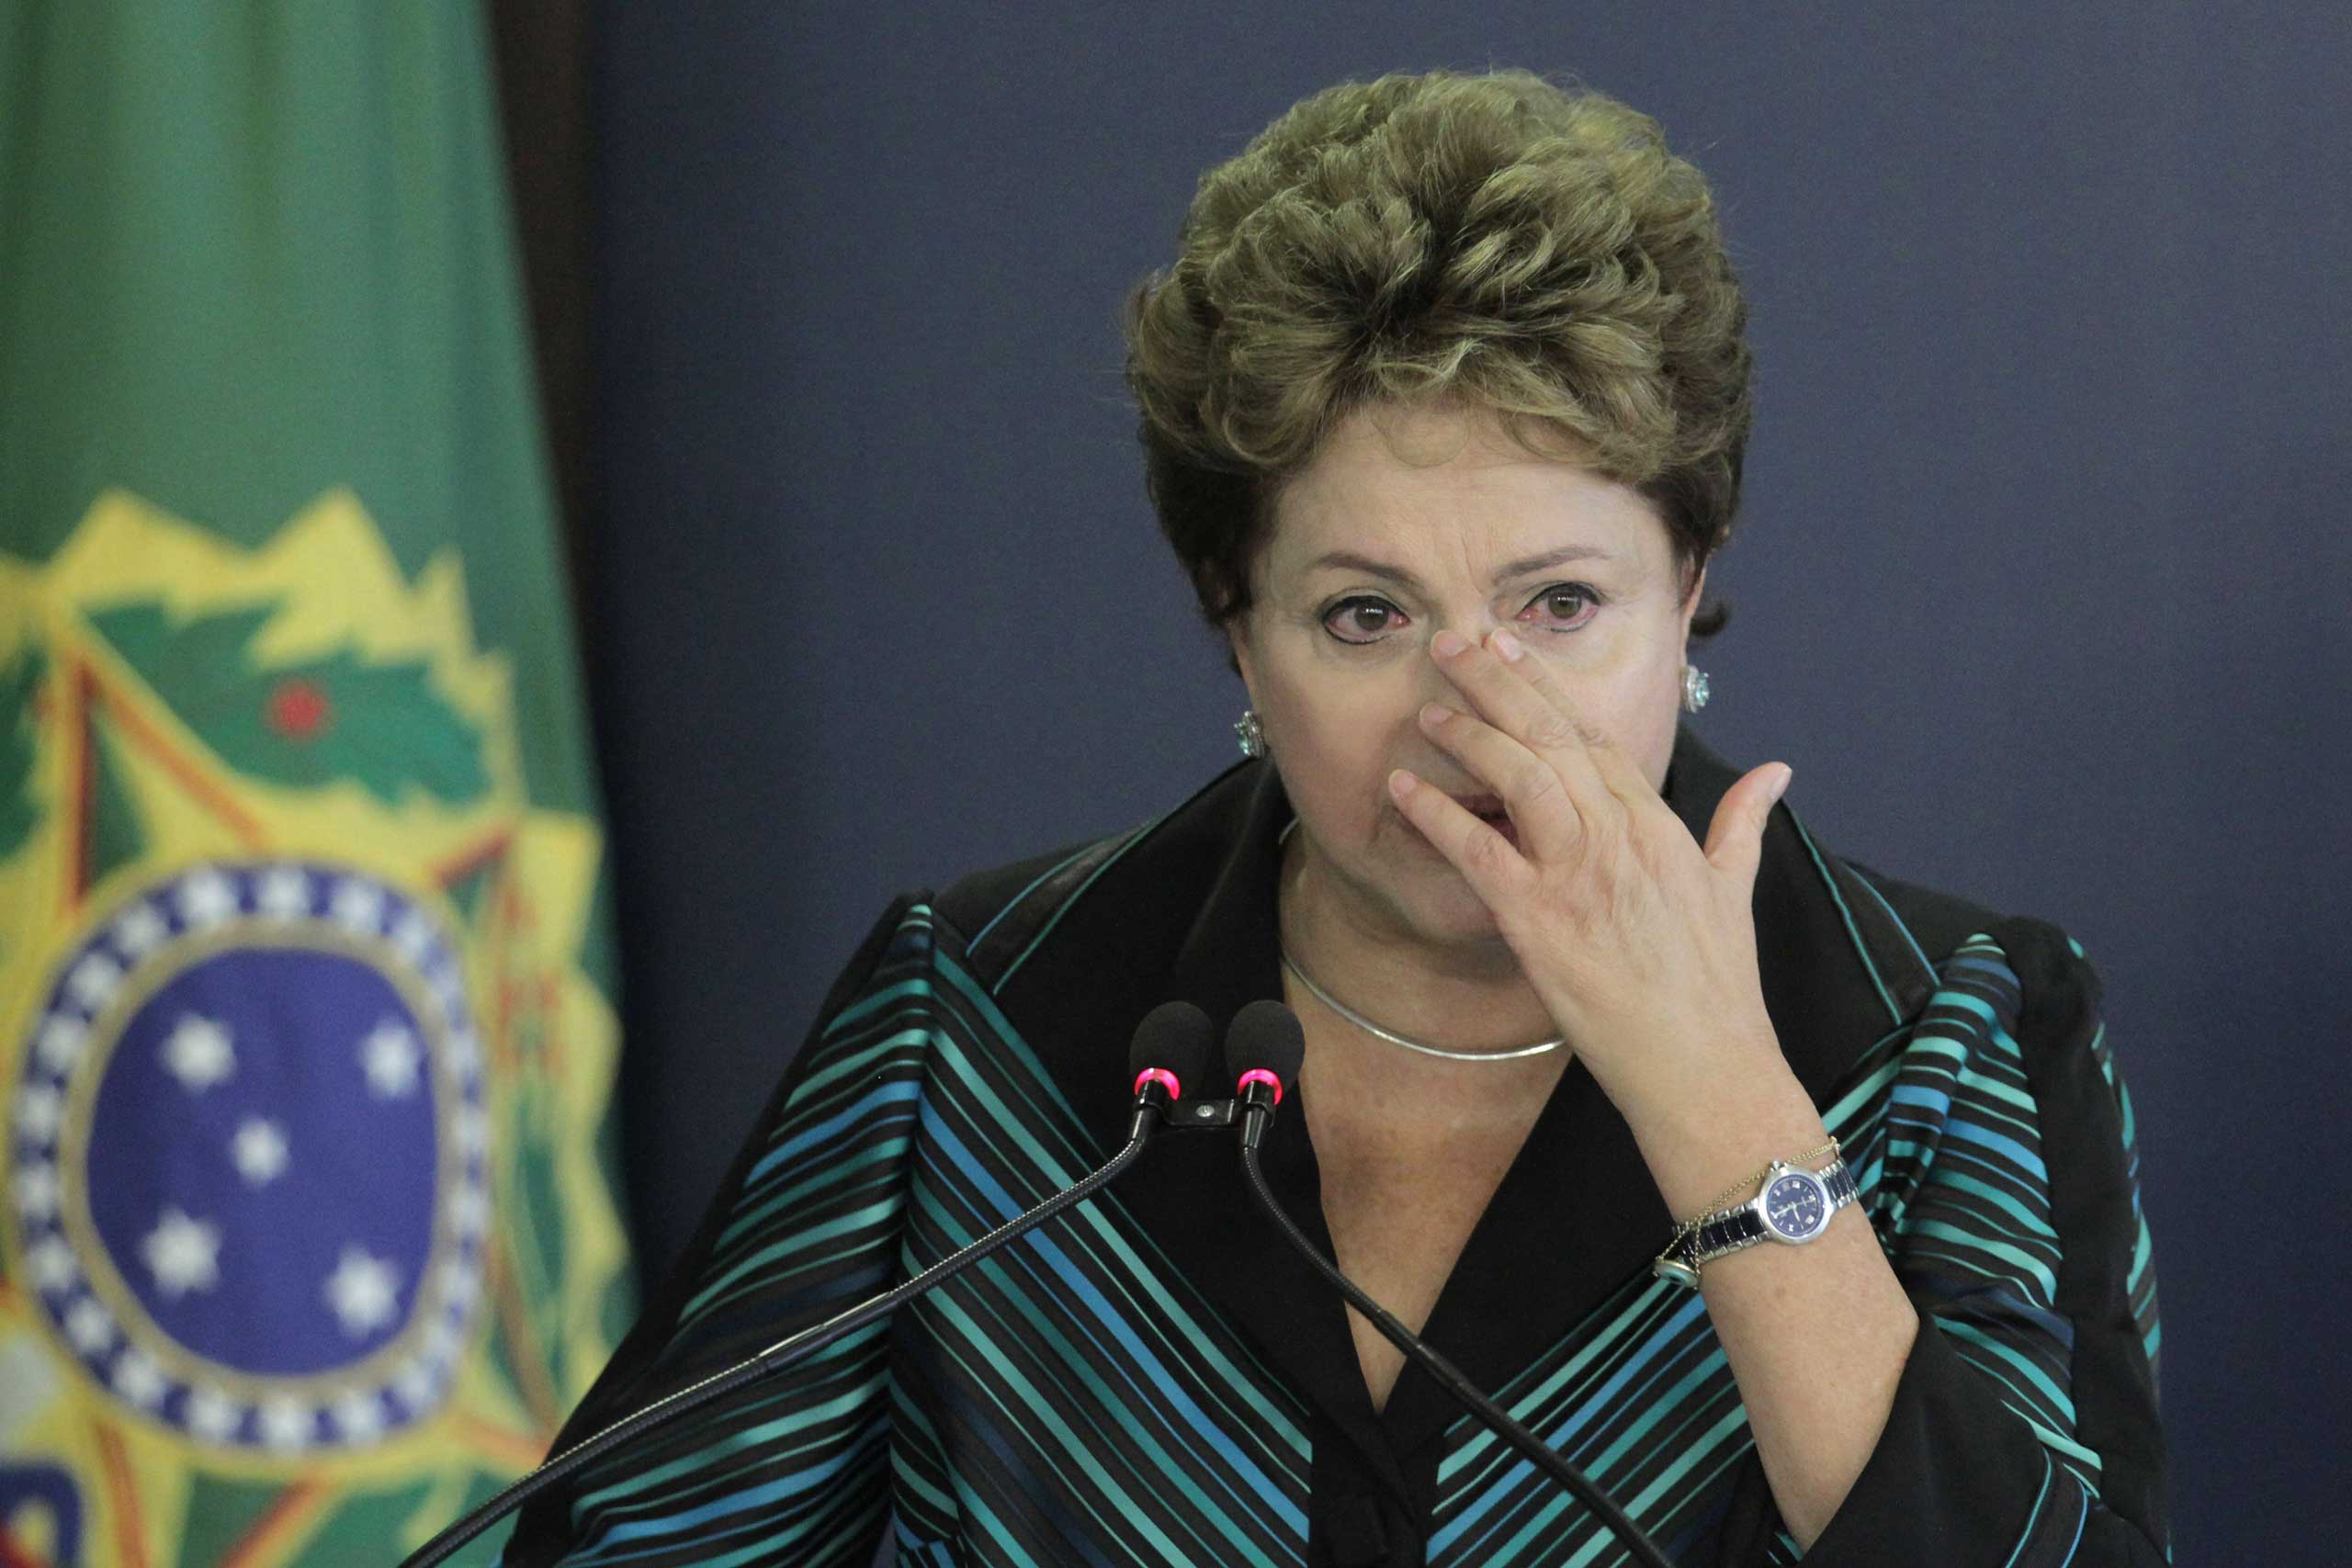 Brazil's President Dilma Rousseff cries during a speech at the launching ceremony of the National Truth Commission Report, at the Planalto Presidential Palace, in Brasilia, Brazil, Dec. 10, 2014. (Eraldo Peres—AP)